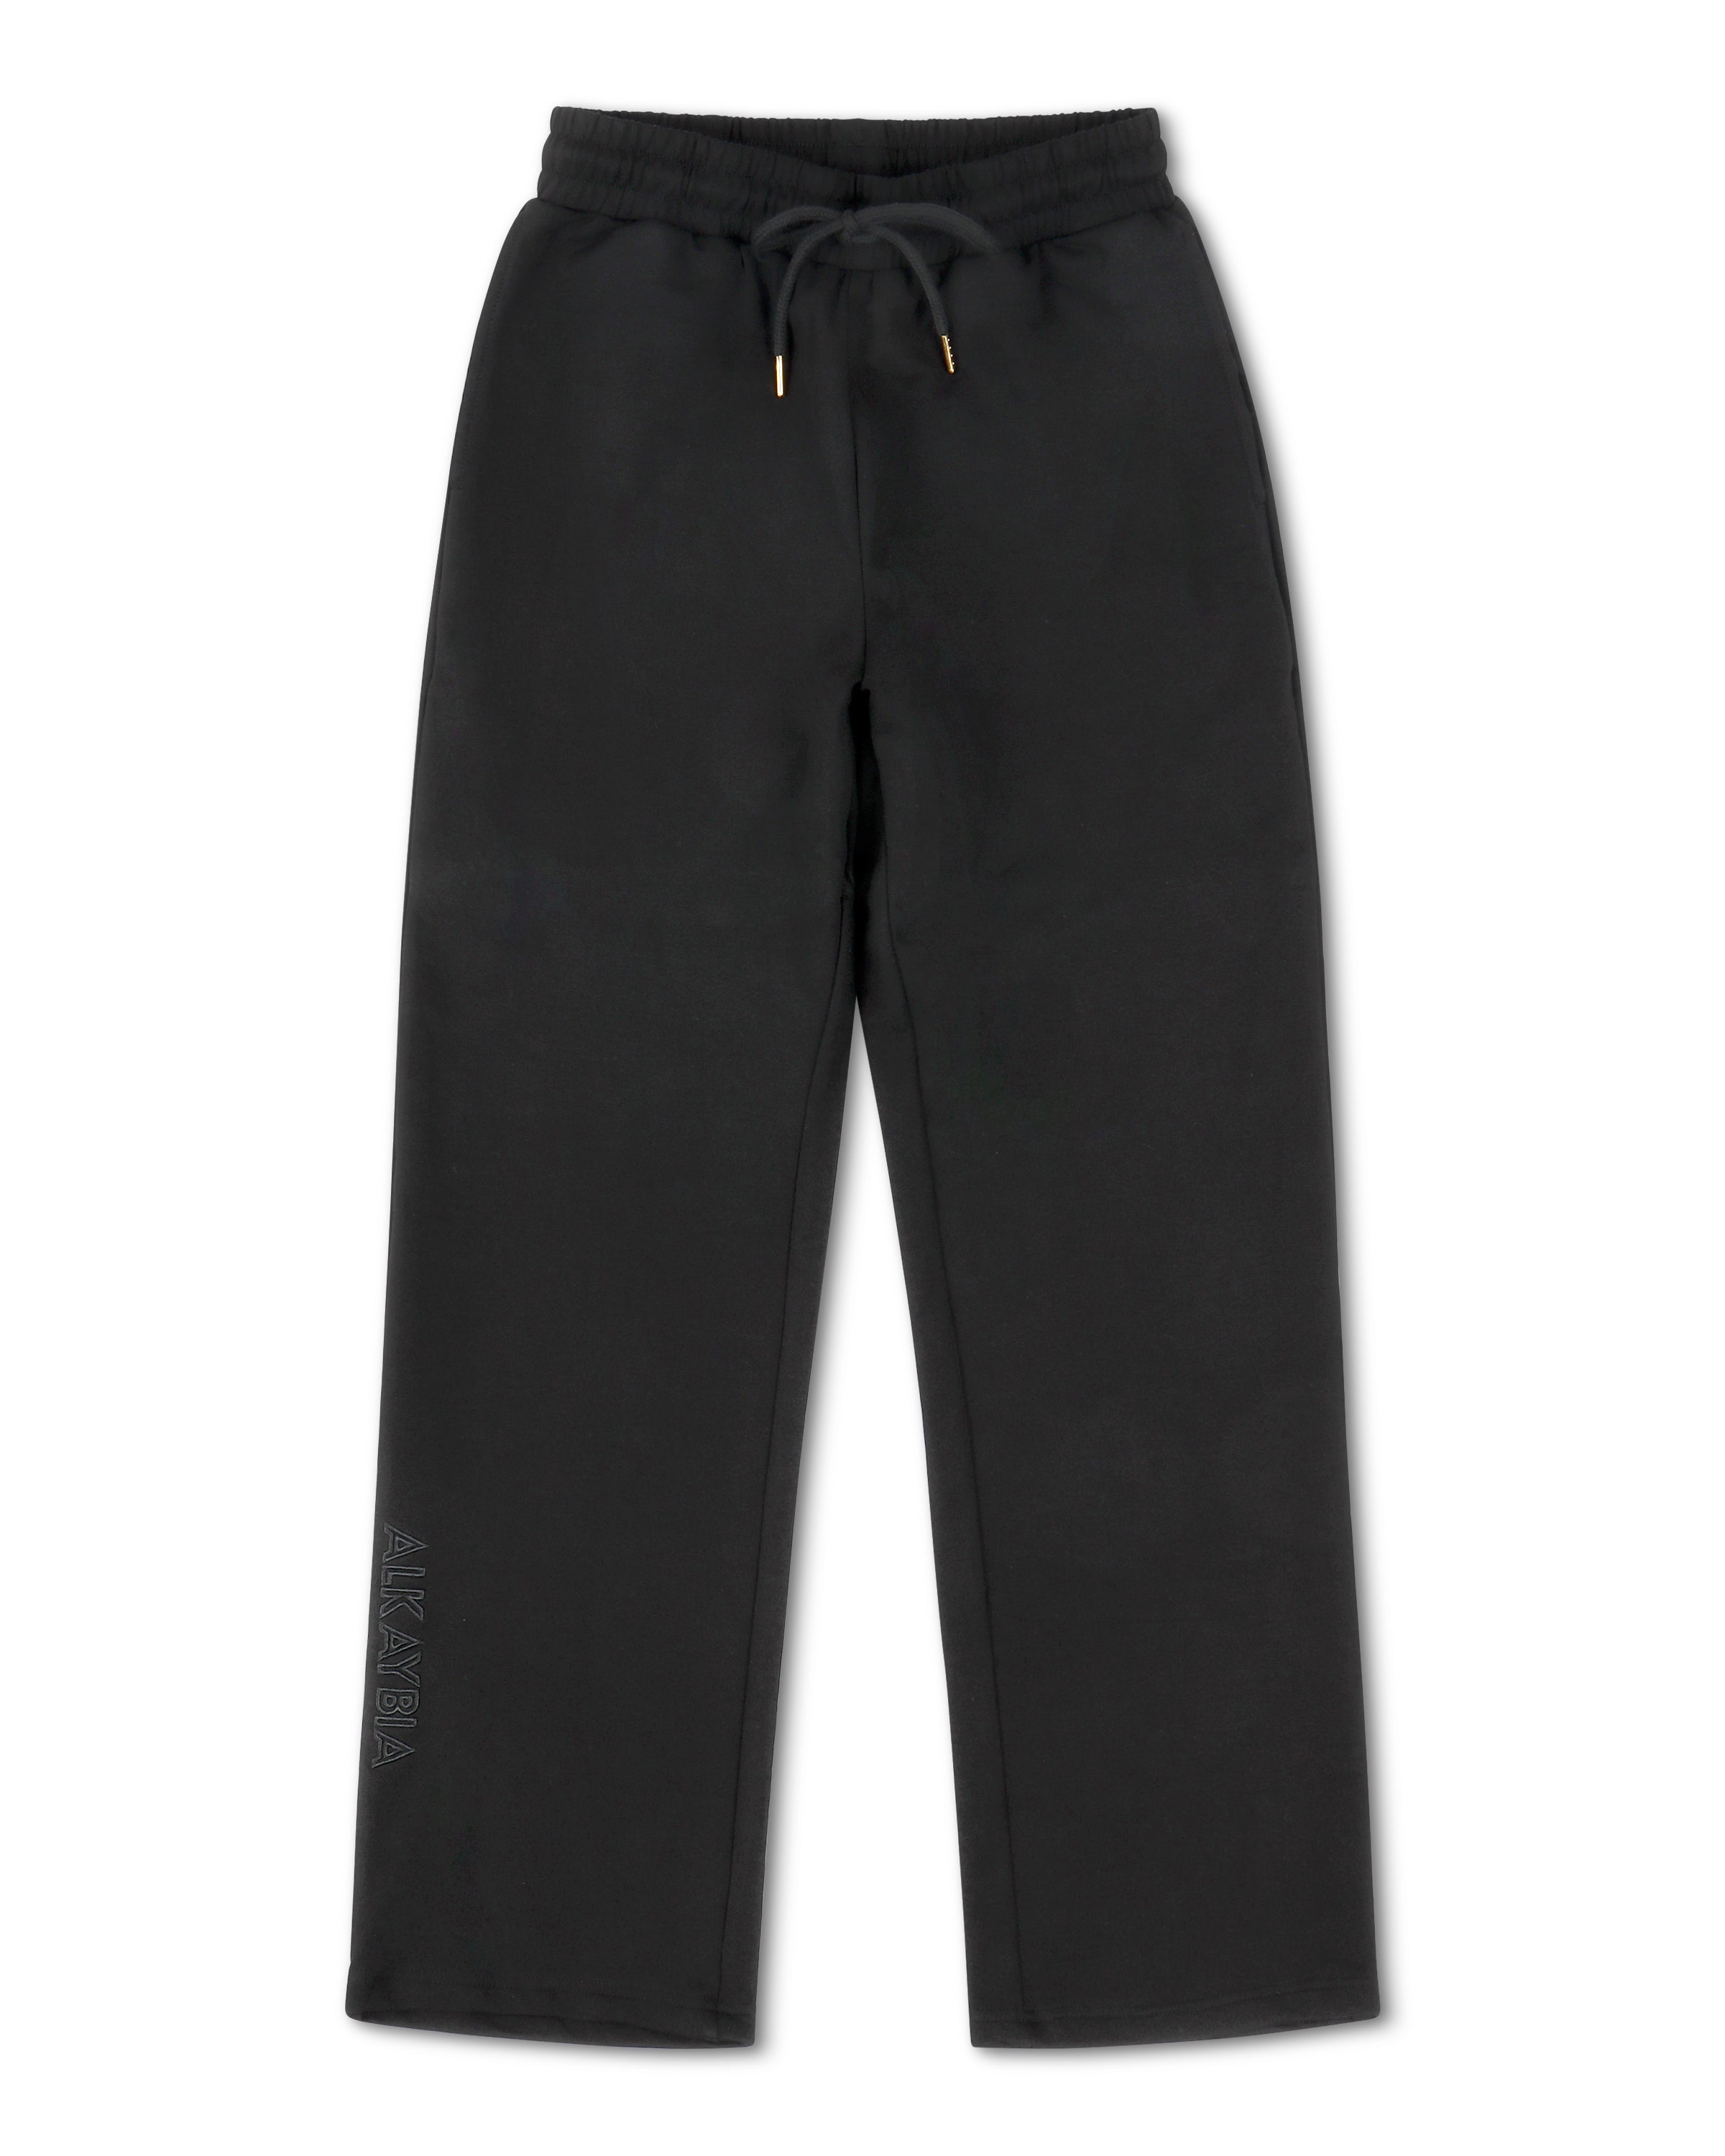 ALKAYBIA LIGHTWEIGHT FRENCH TERRY SWEATPANT